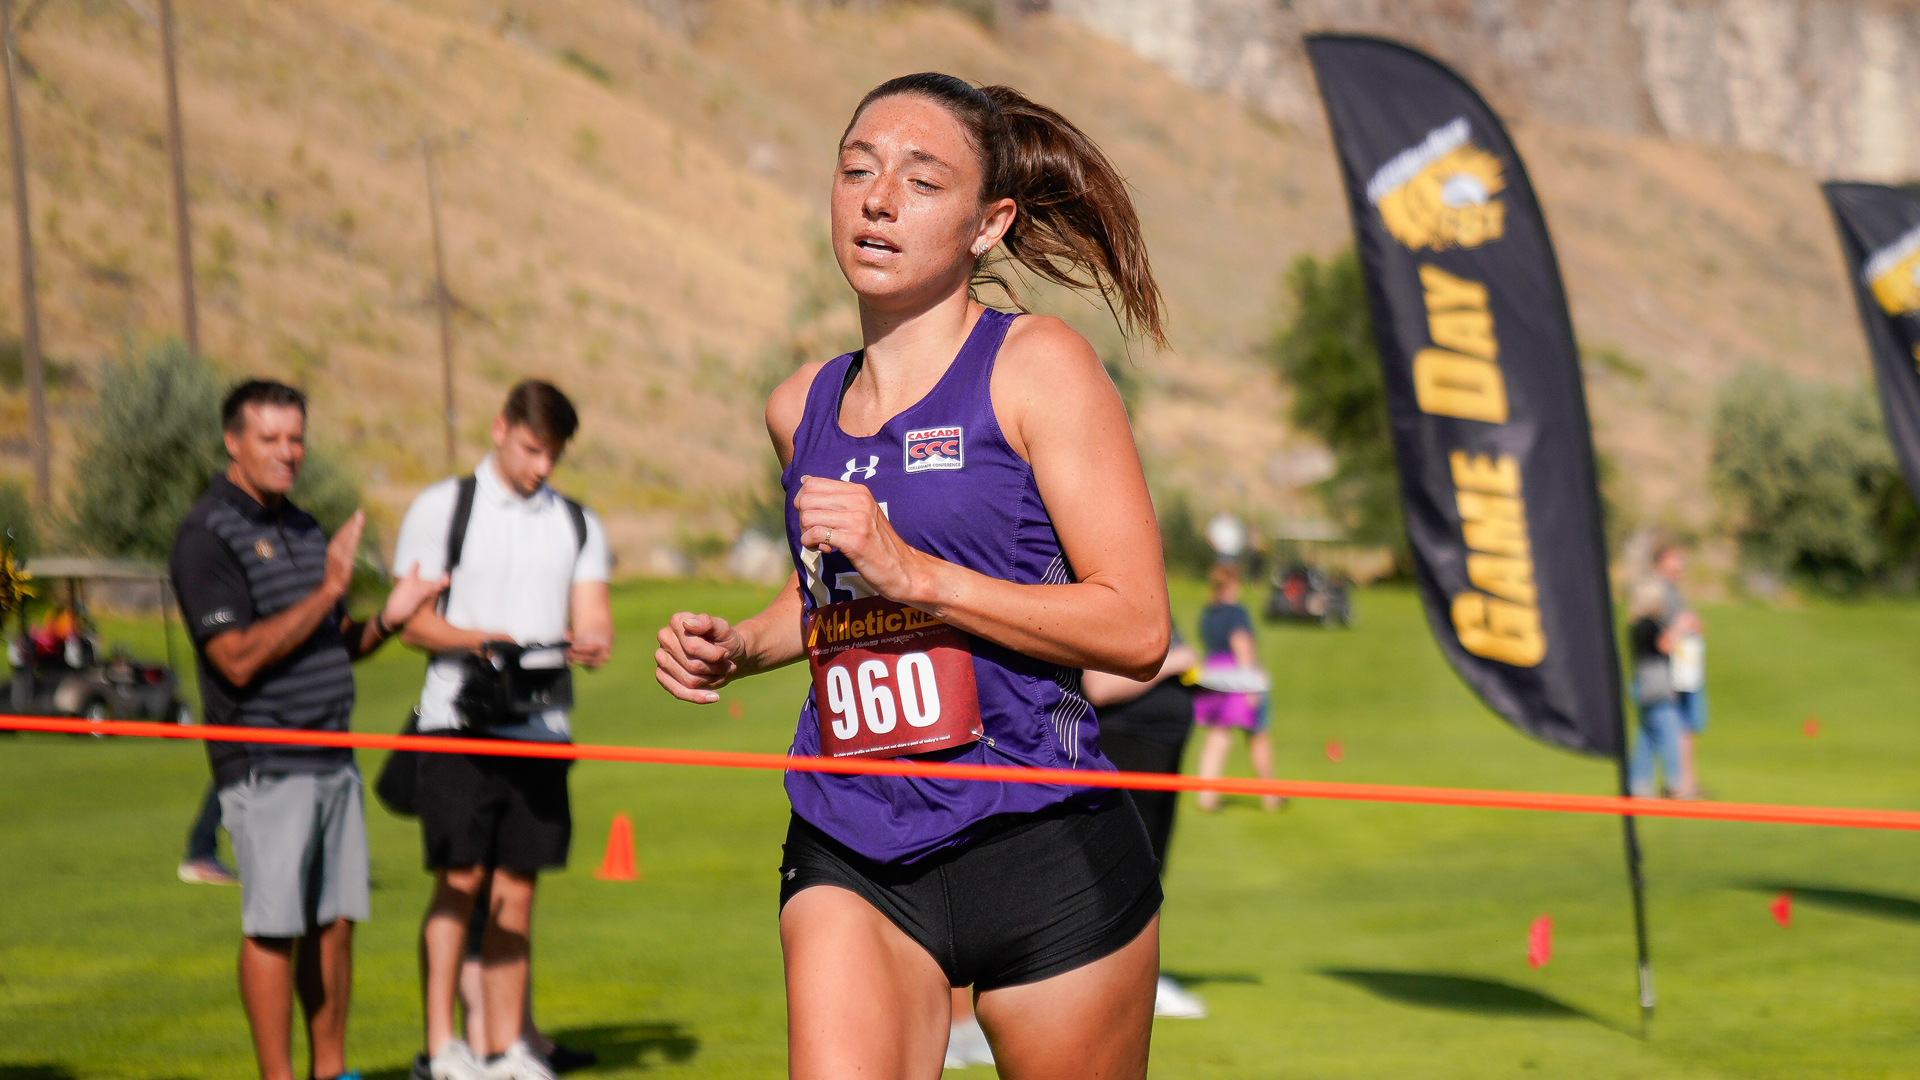 Women's Cross Country - The College of Idaho